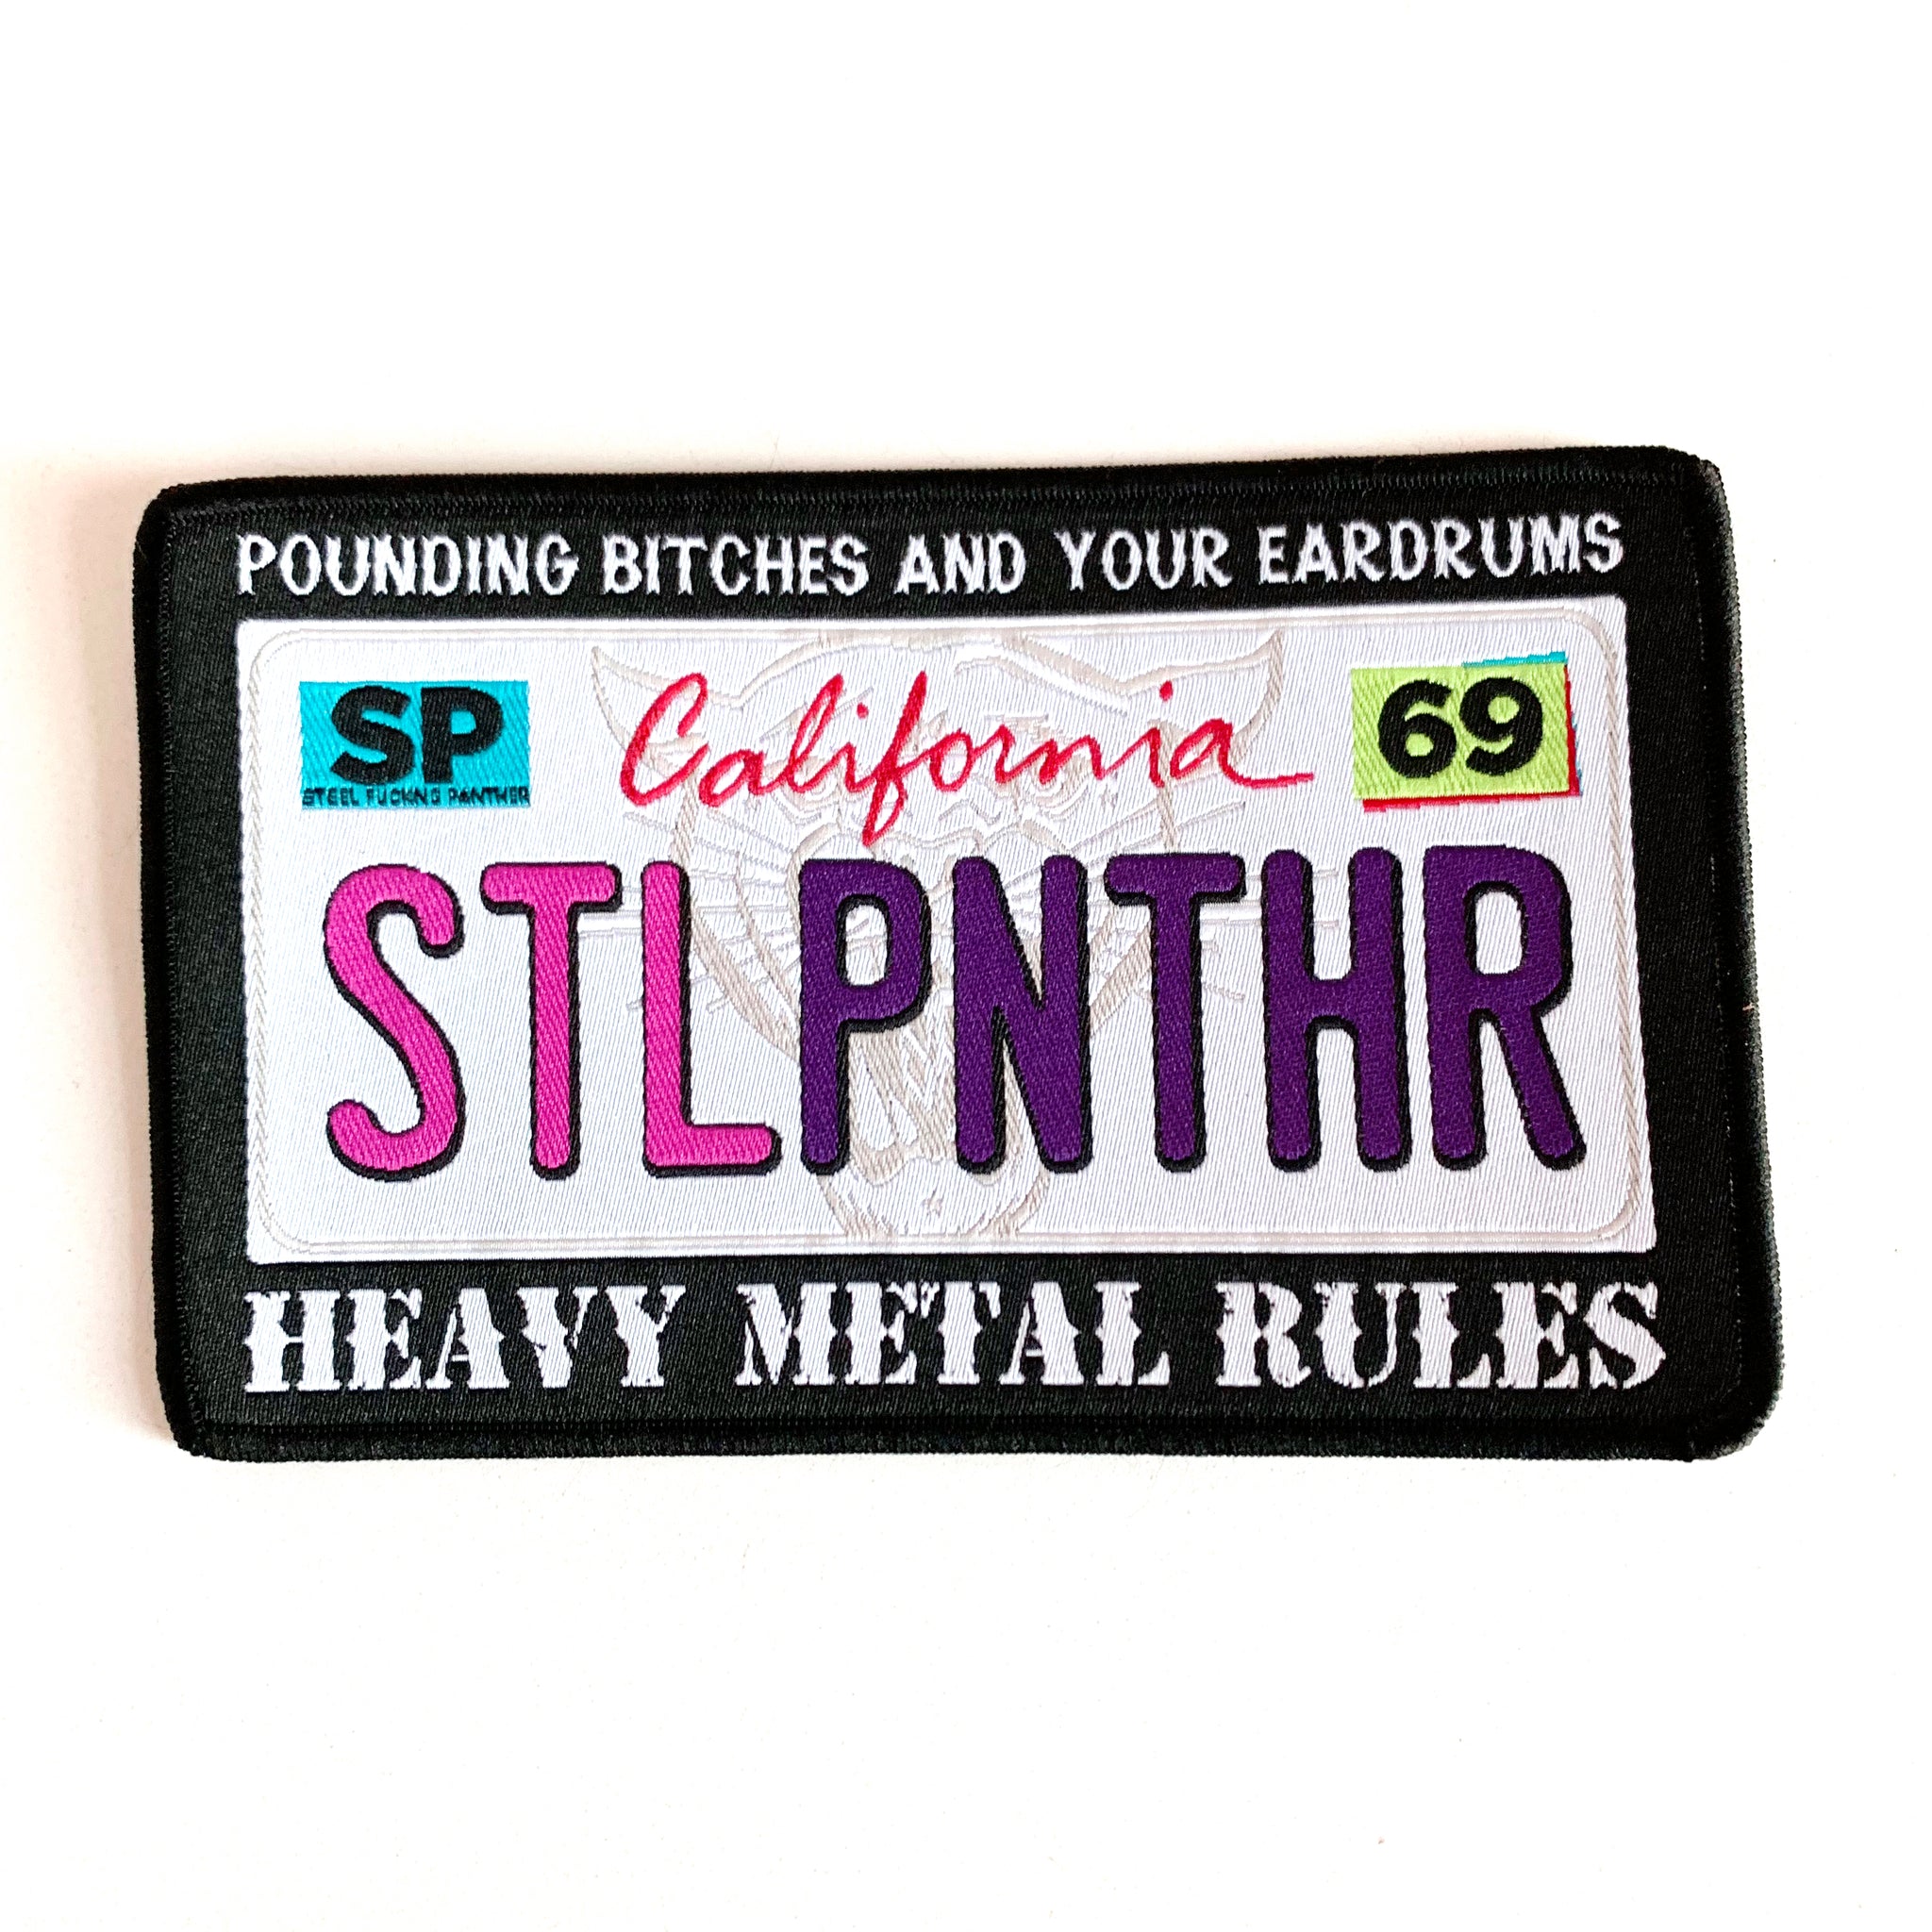 Heavy Metal Rules License Plate Patch